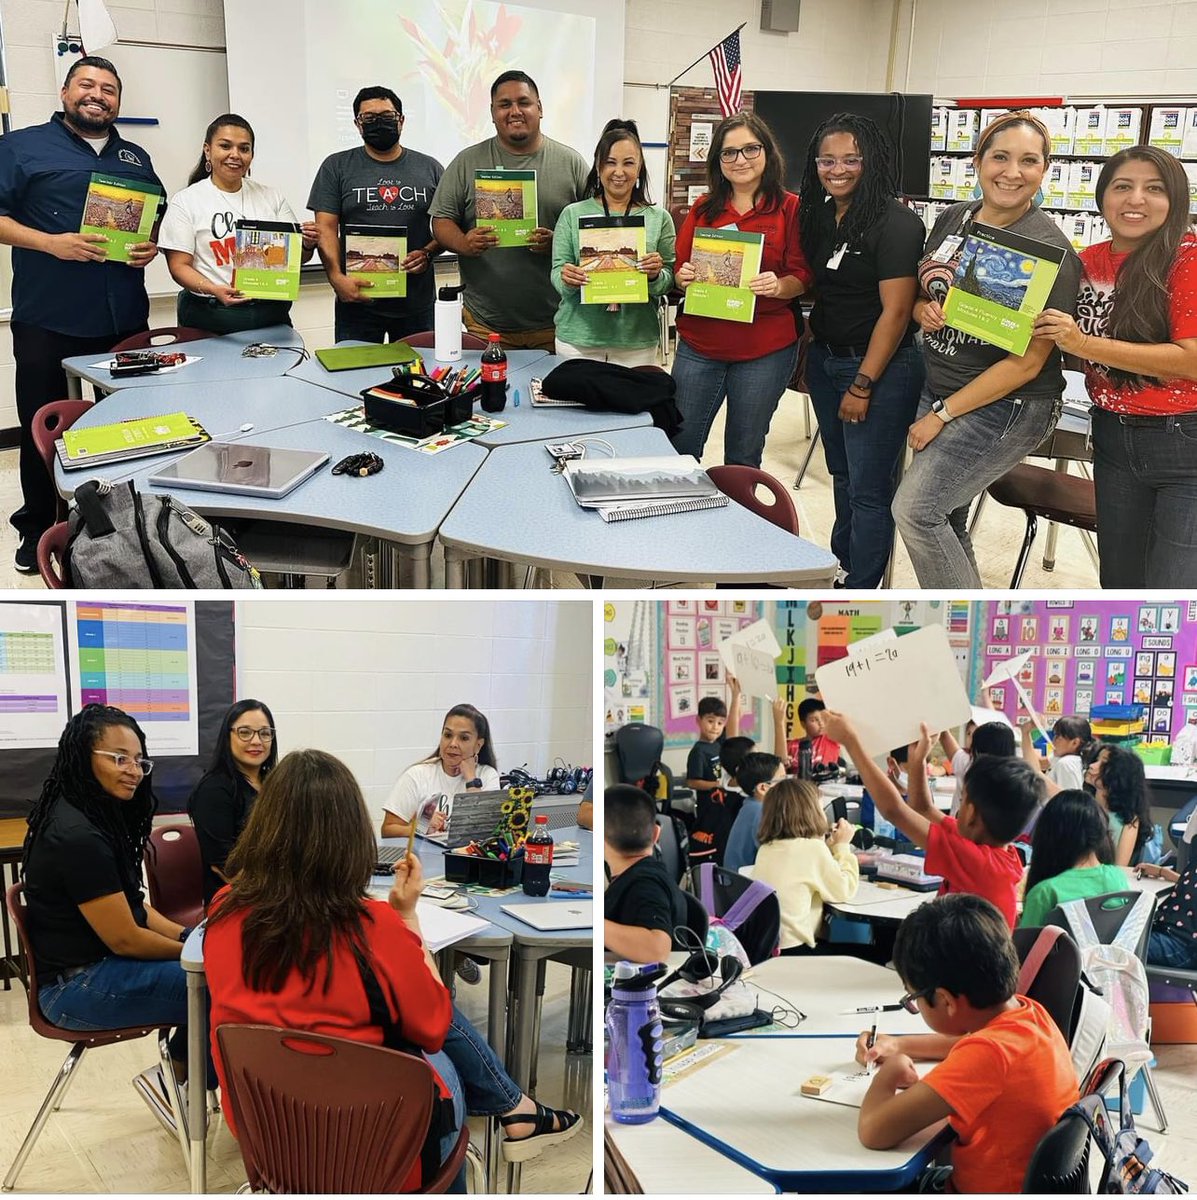 Eureka PLCs at several of our elementary schools this week. We are helping teachers unlock the greatness in every child. HCISD teachers are sparking student curiosity with high-quality instruction as they lead every math lesson with confidence. 📚 👩🏻‍🏫 ✖️➕ 👨🏻‍🏫 #TrustTheProcess